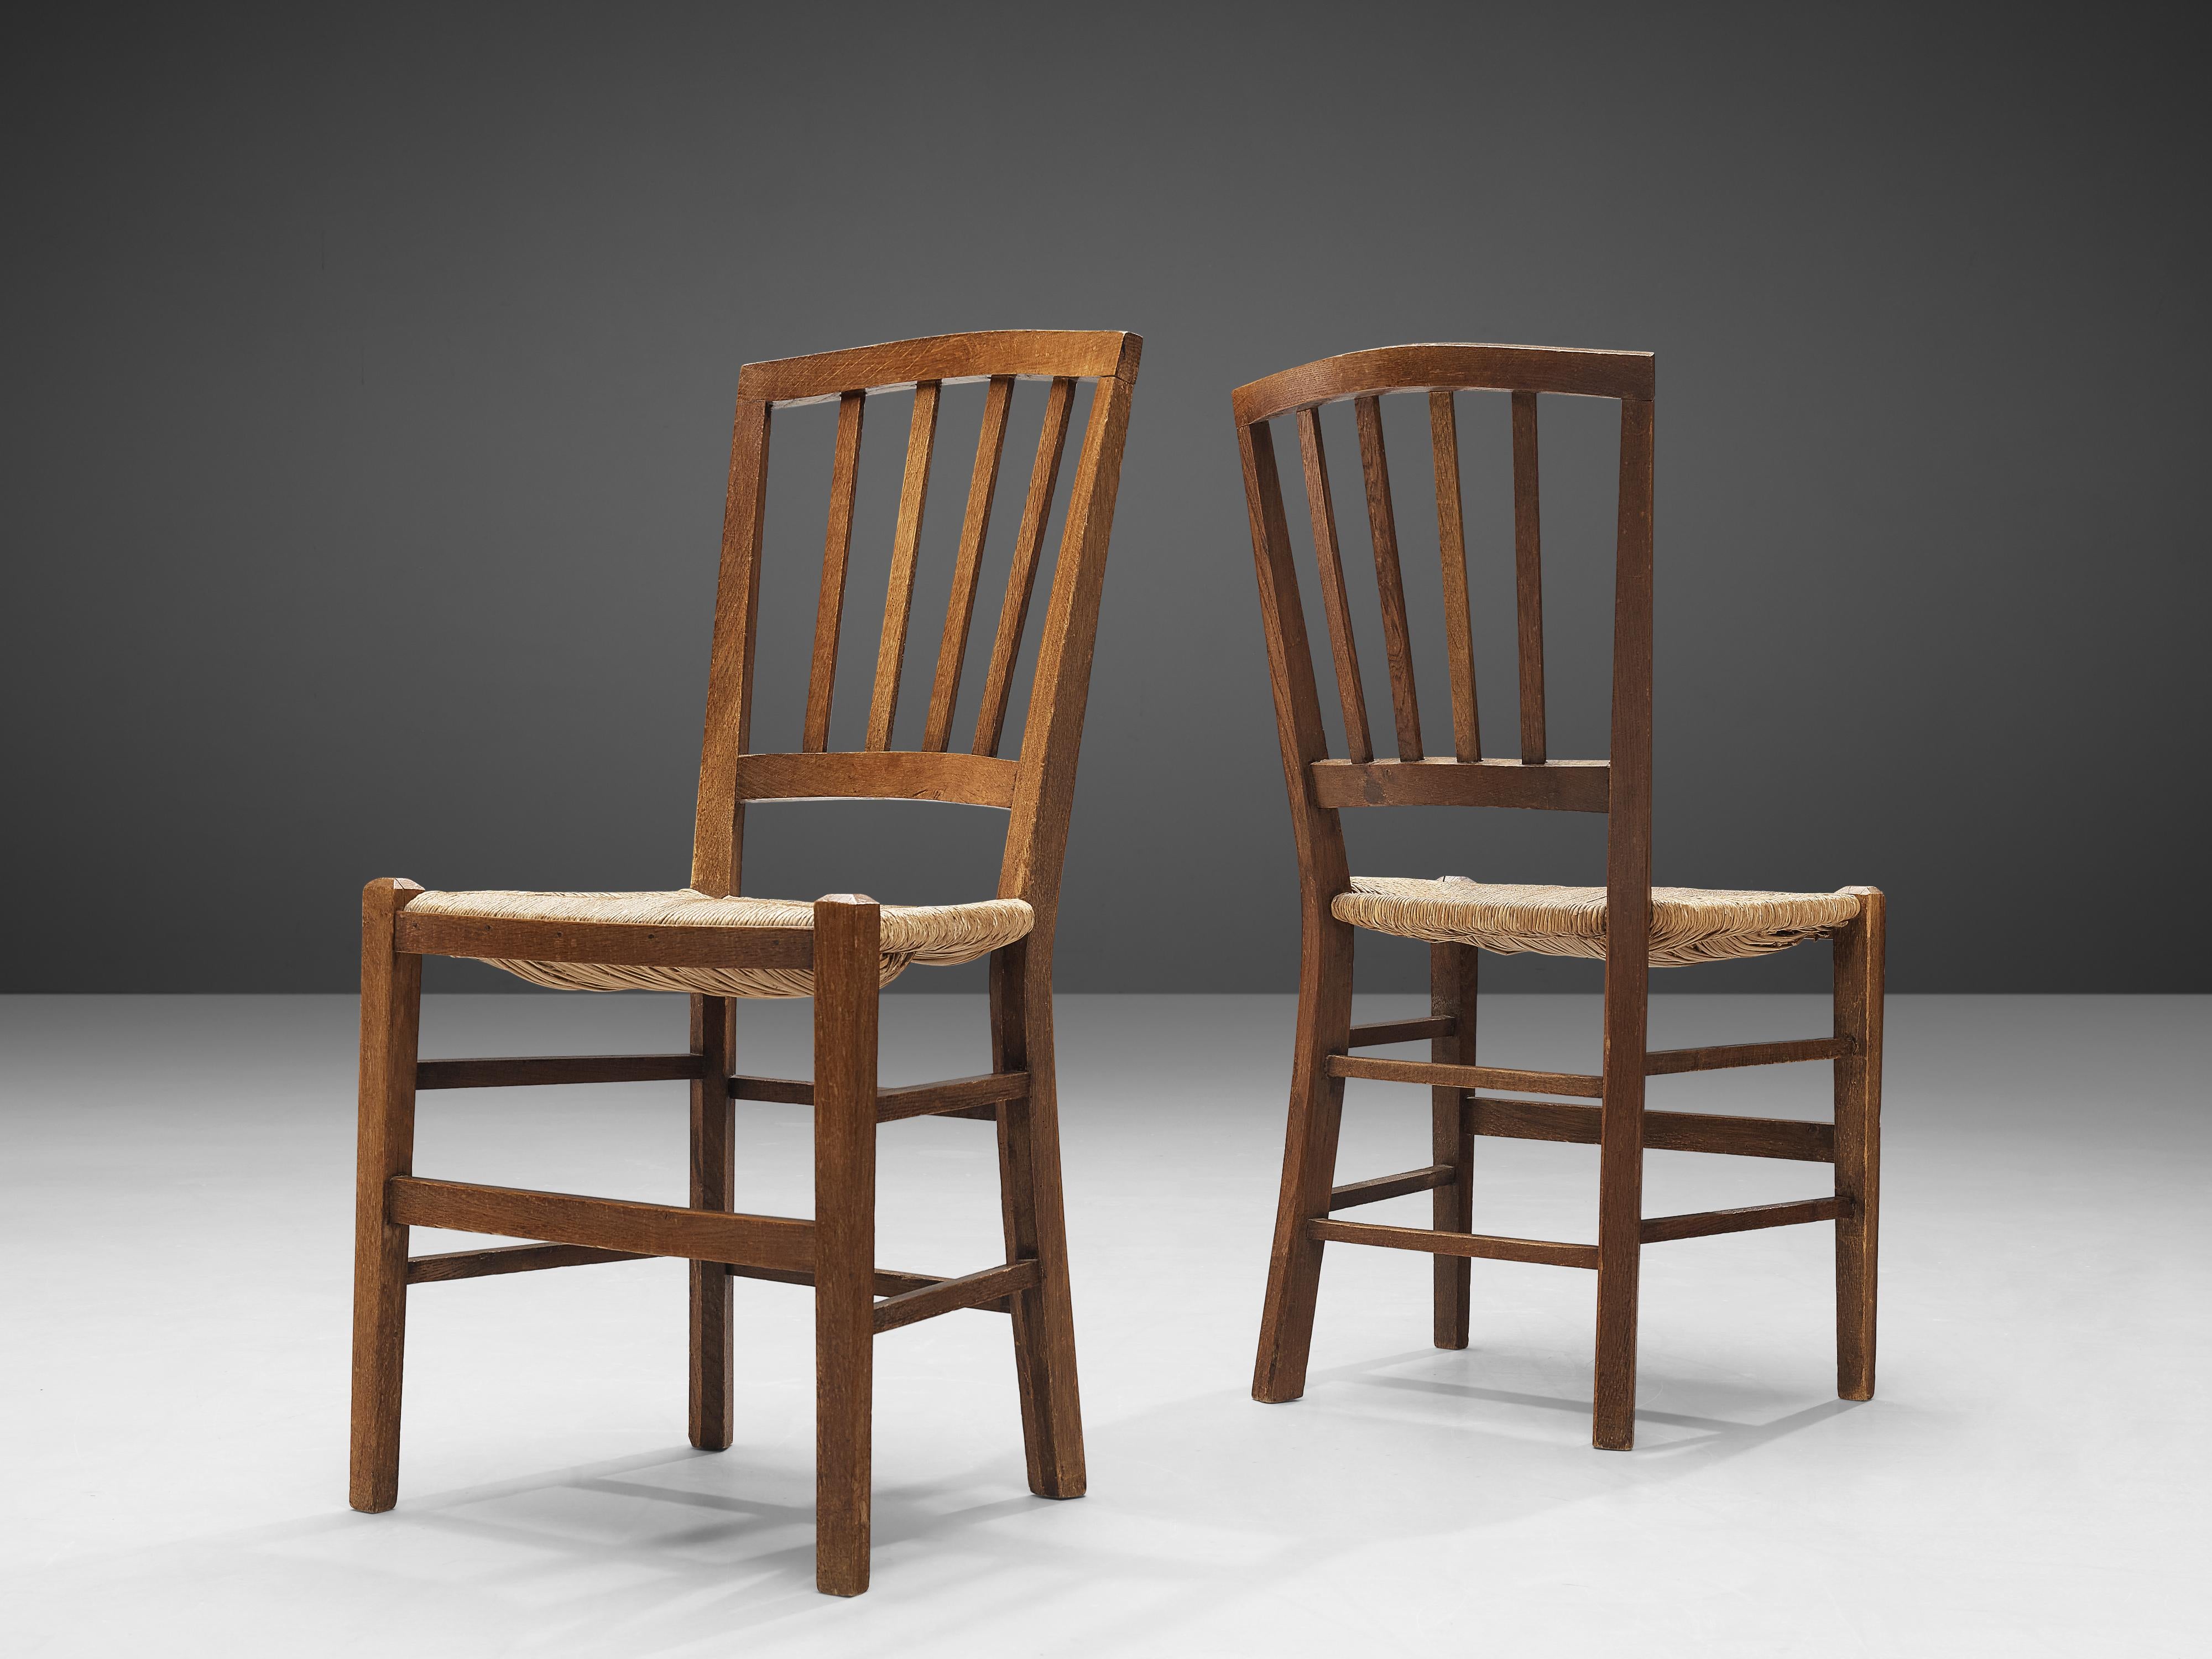 Dutch Dining Chairs in Stained Oak and Paper Cord Seating